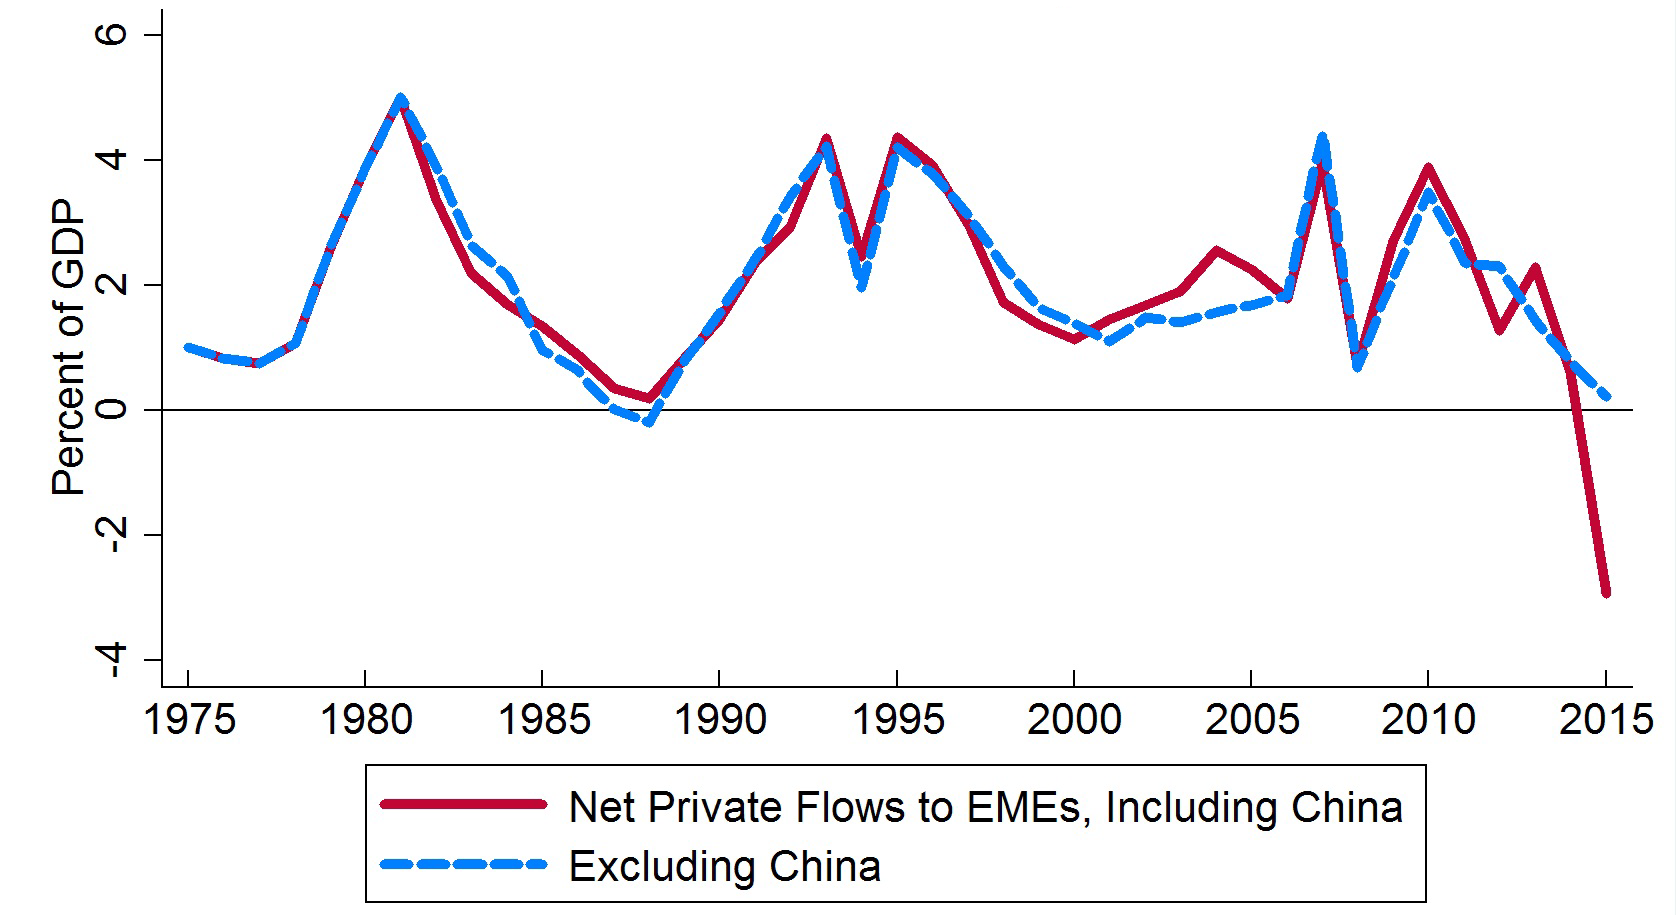 Chart 1: Net Annual Private Flows to Emerging Markets in a Historical Perspective. See accessible link for data.